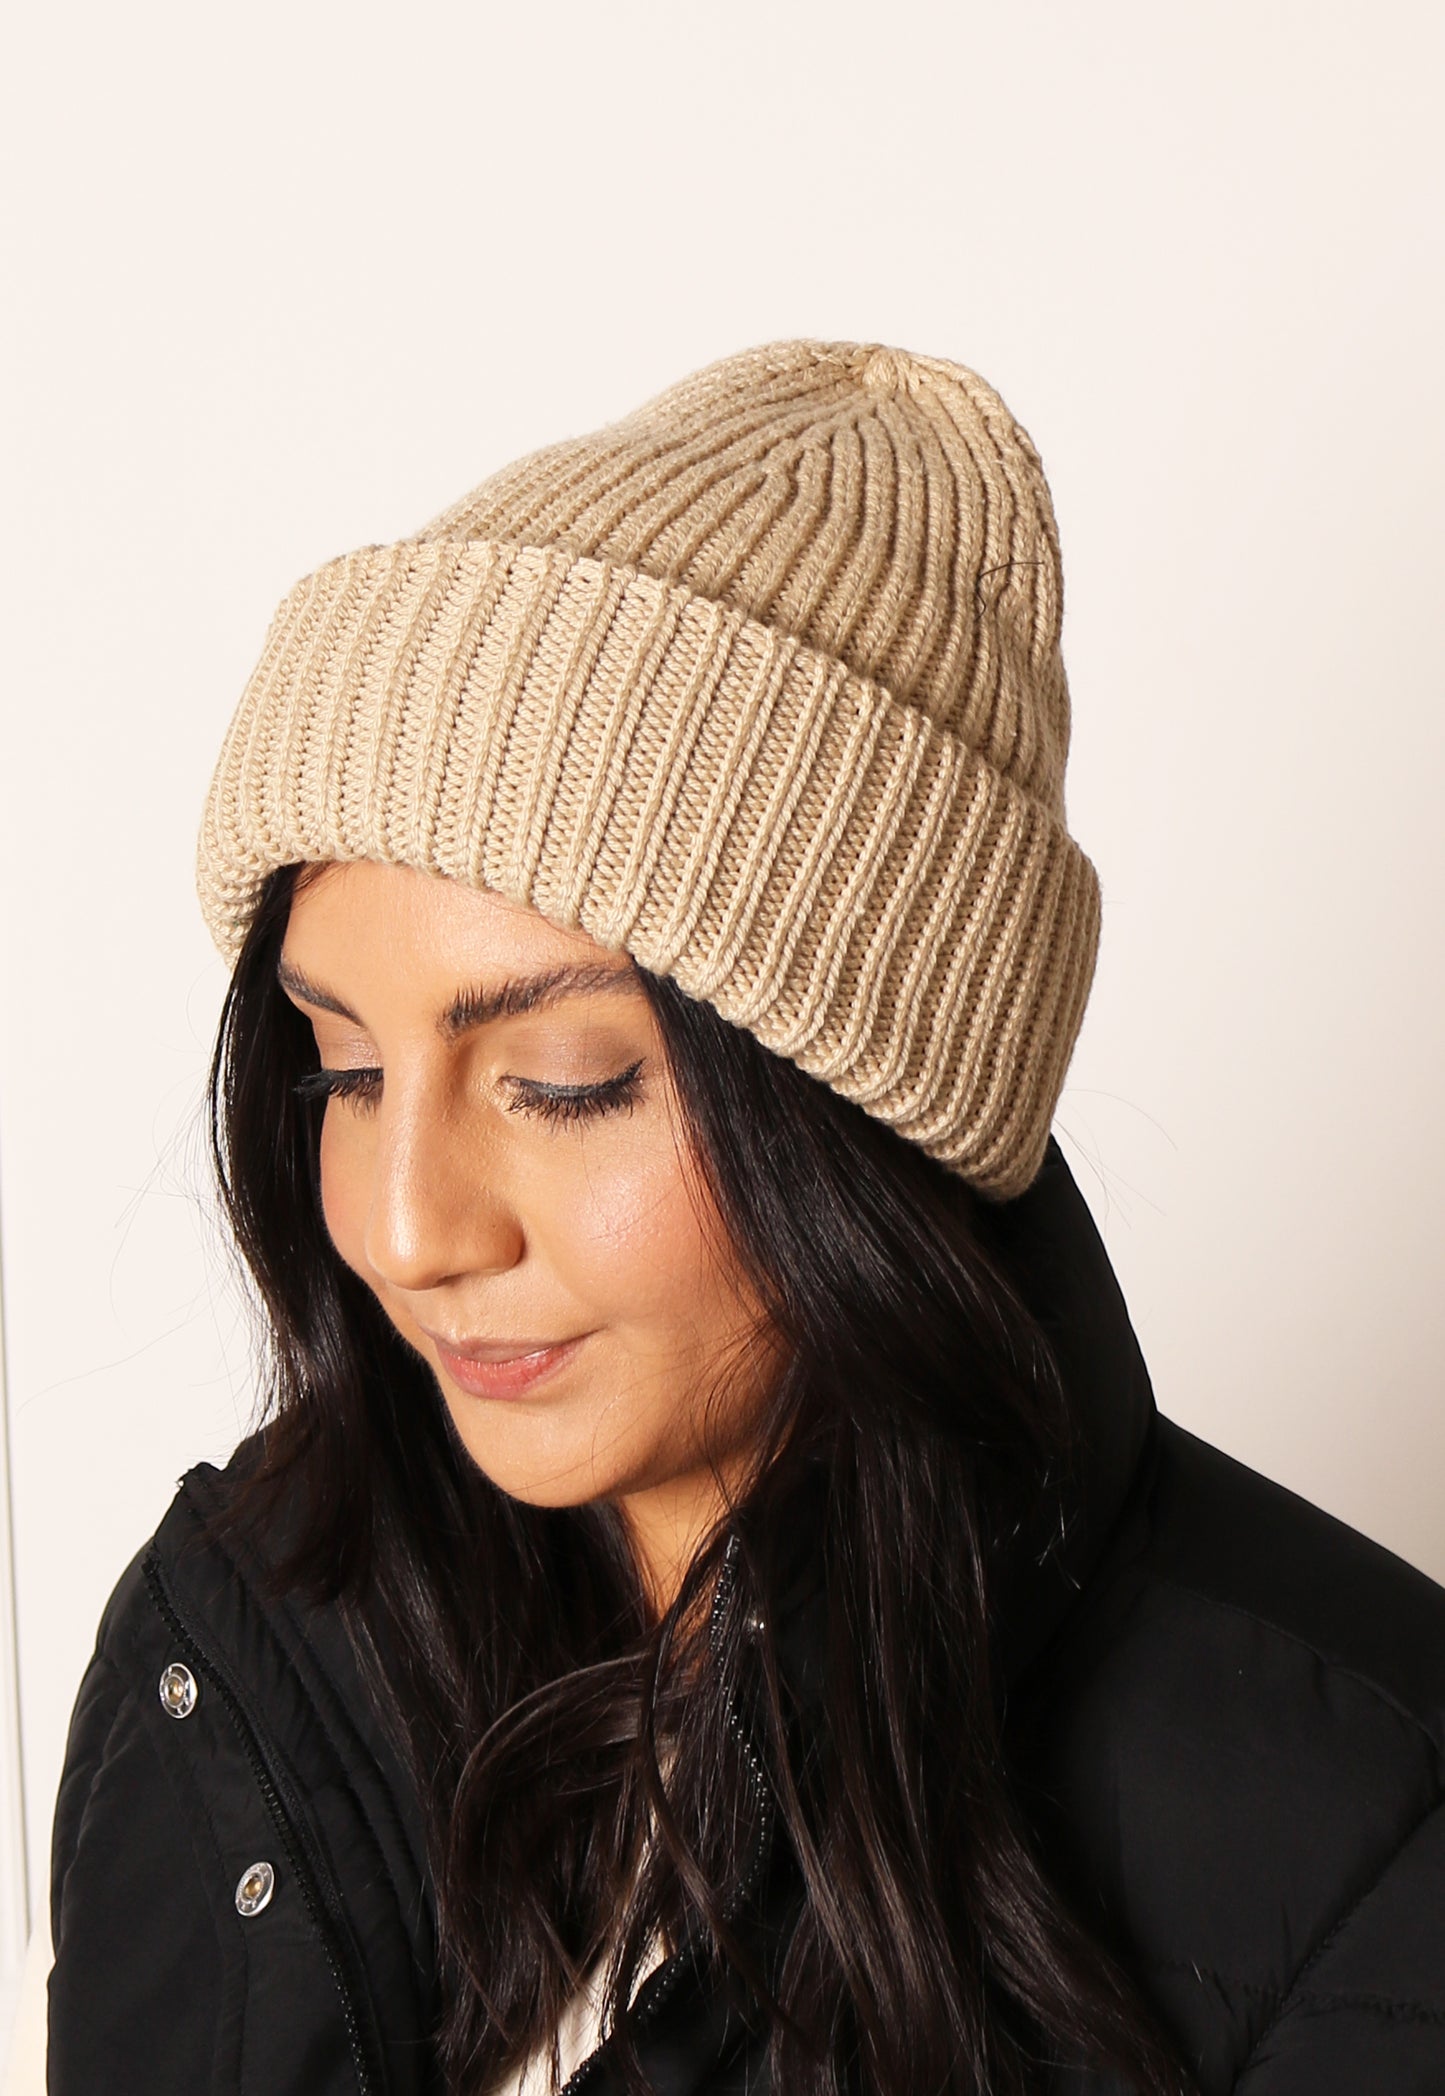 PIECES Juca Fisherman Rib Knit Beanie Hat in Beige - One Nation Clothing